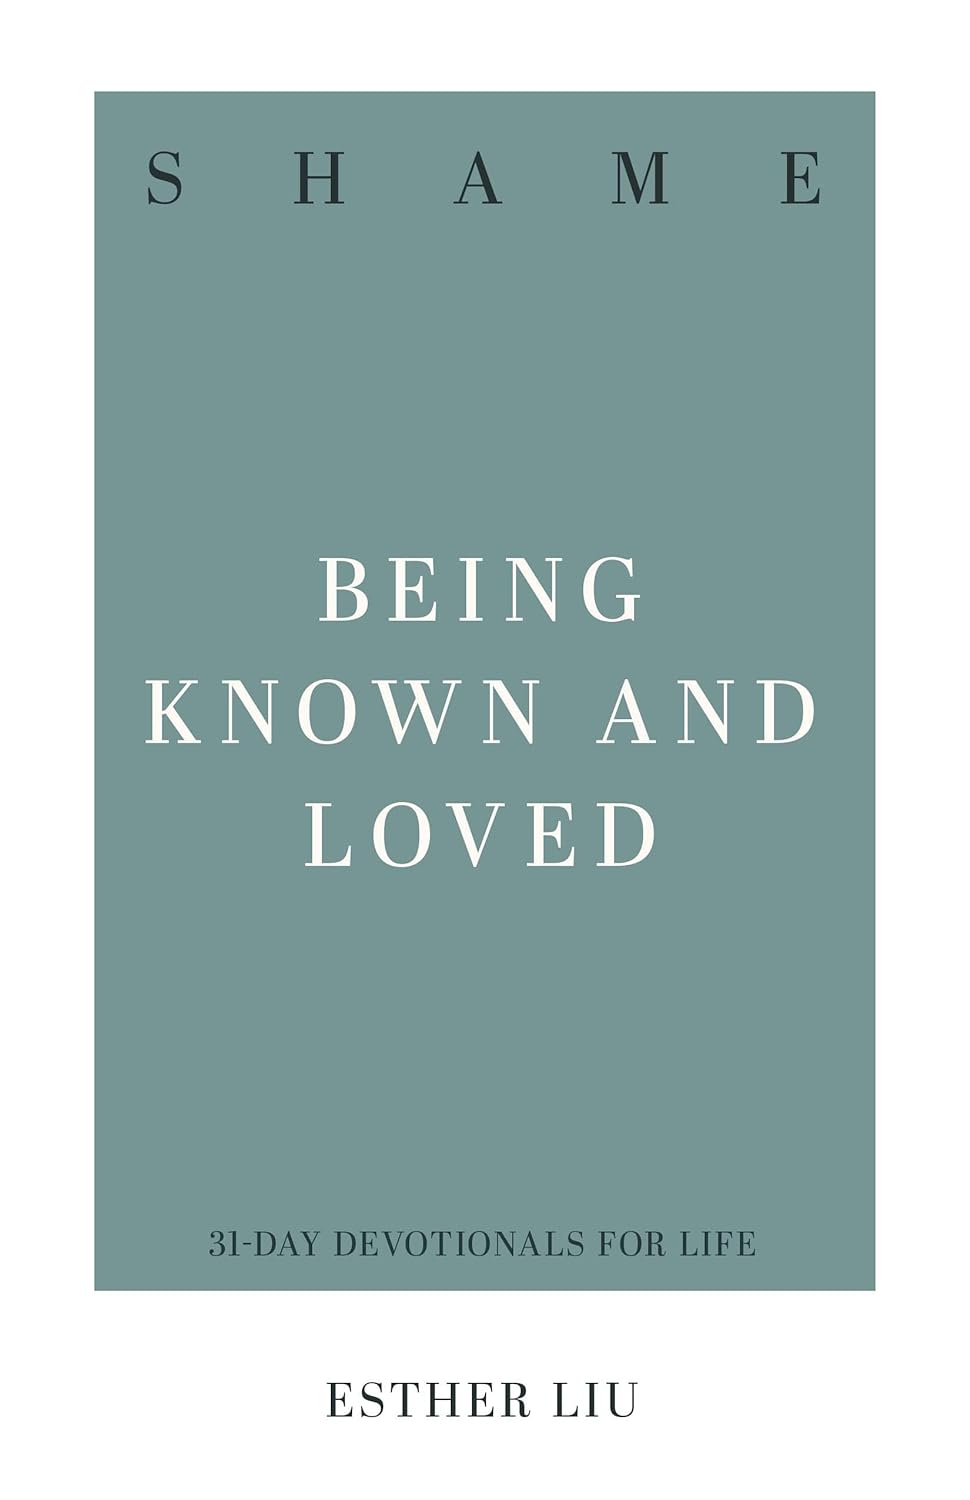 Being Known and Loved by Esther Liu